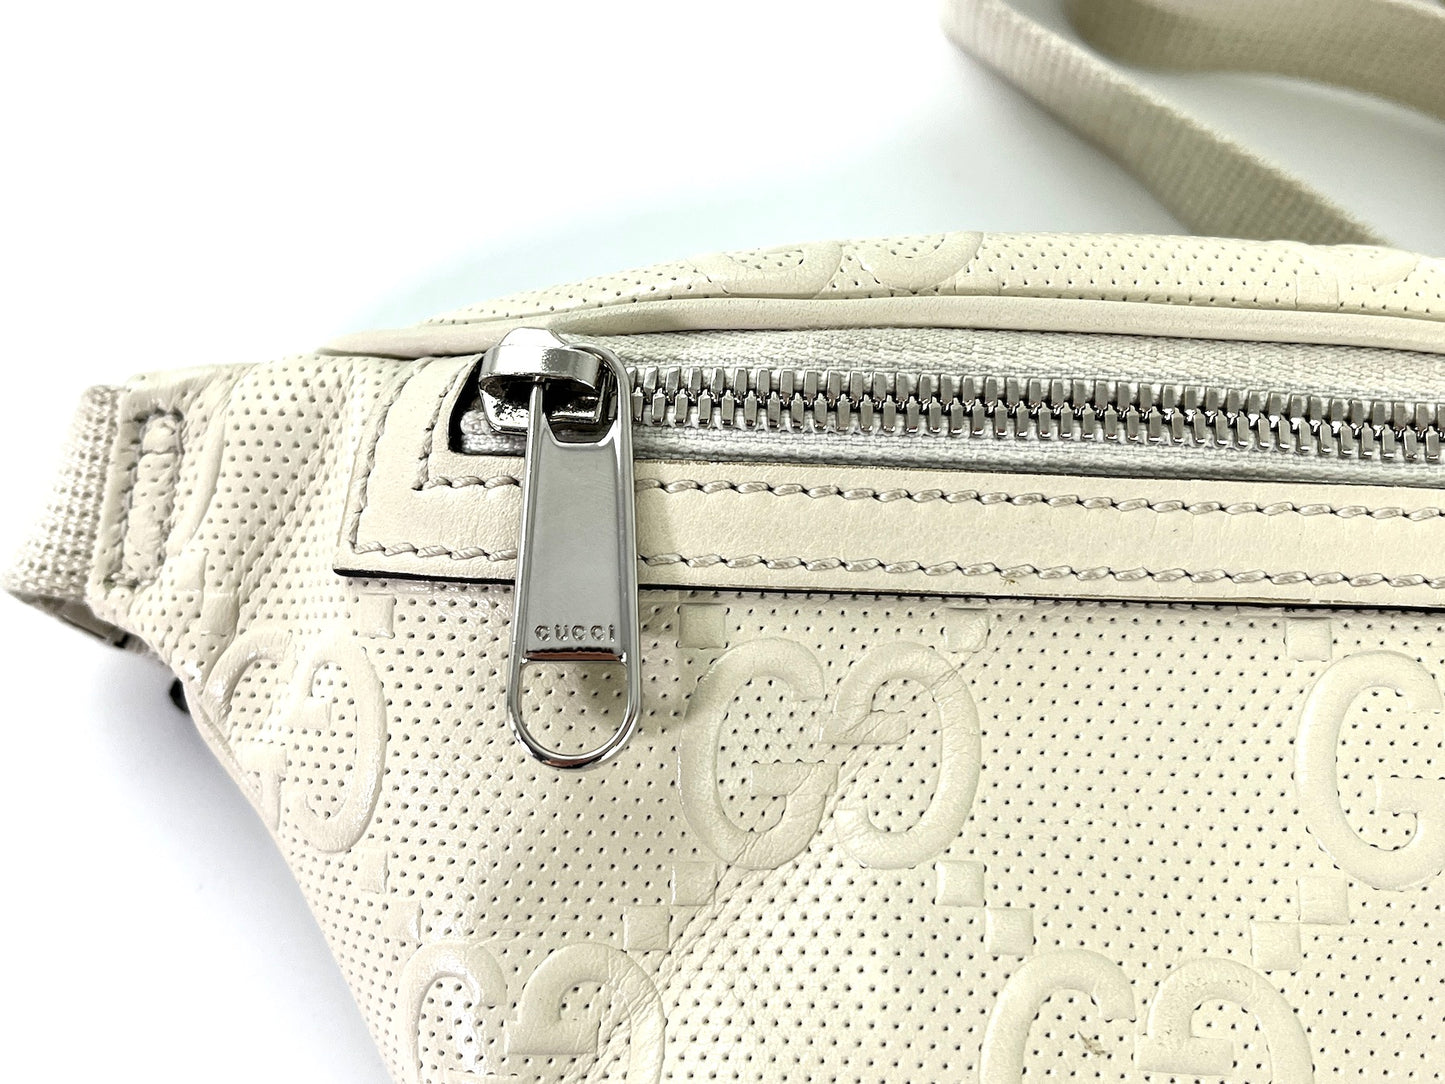 GUCCI Ivory Embossed GG Leather Belt Waist Bag